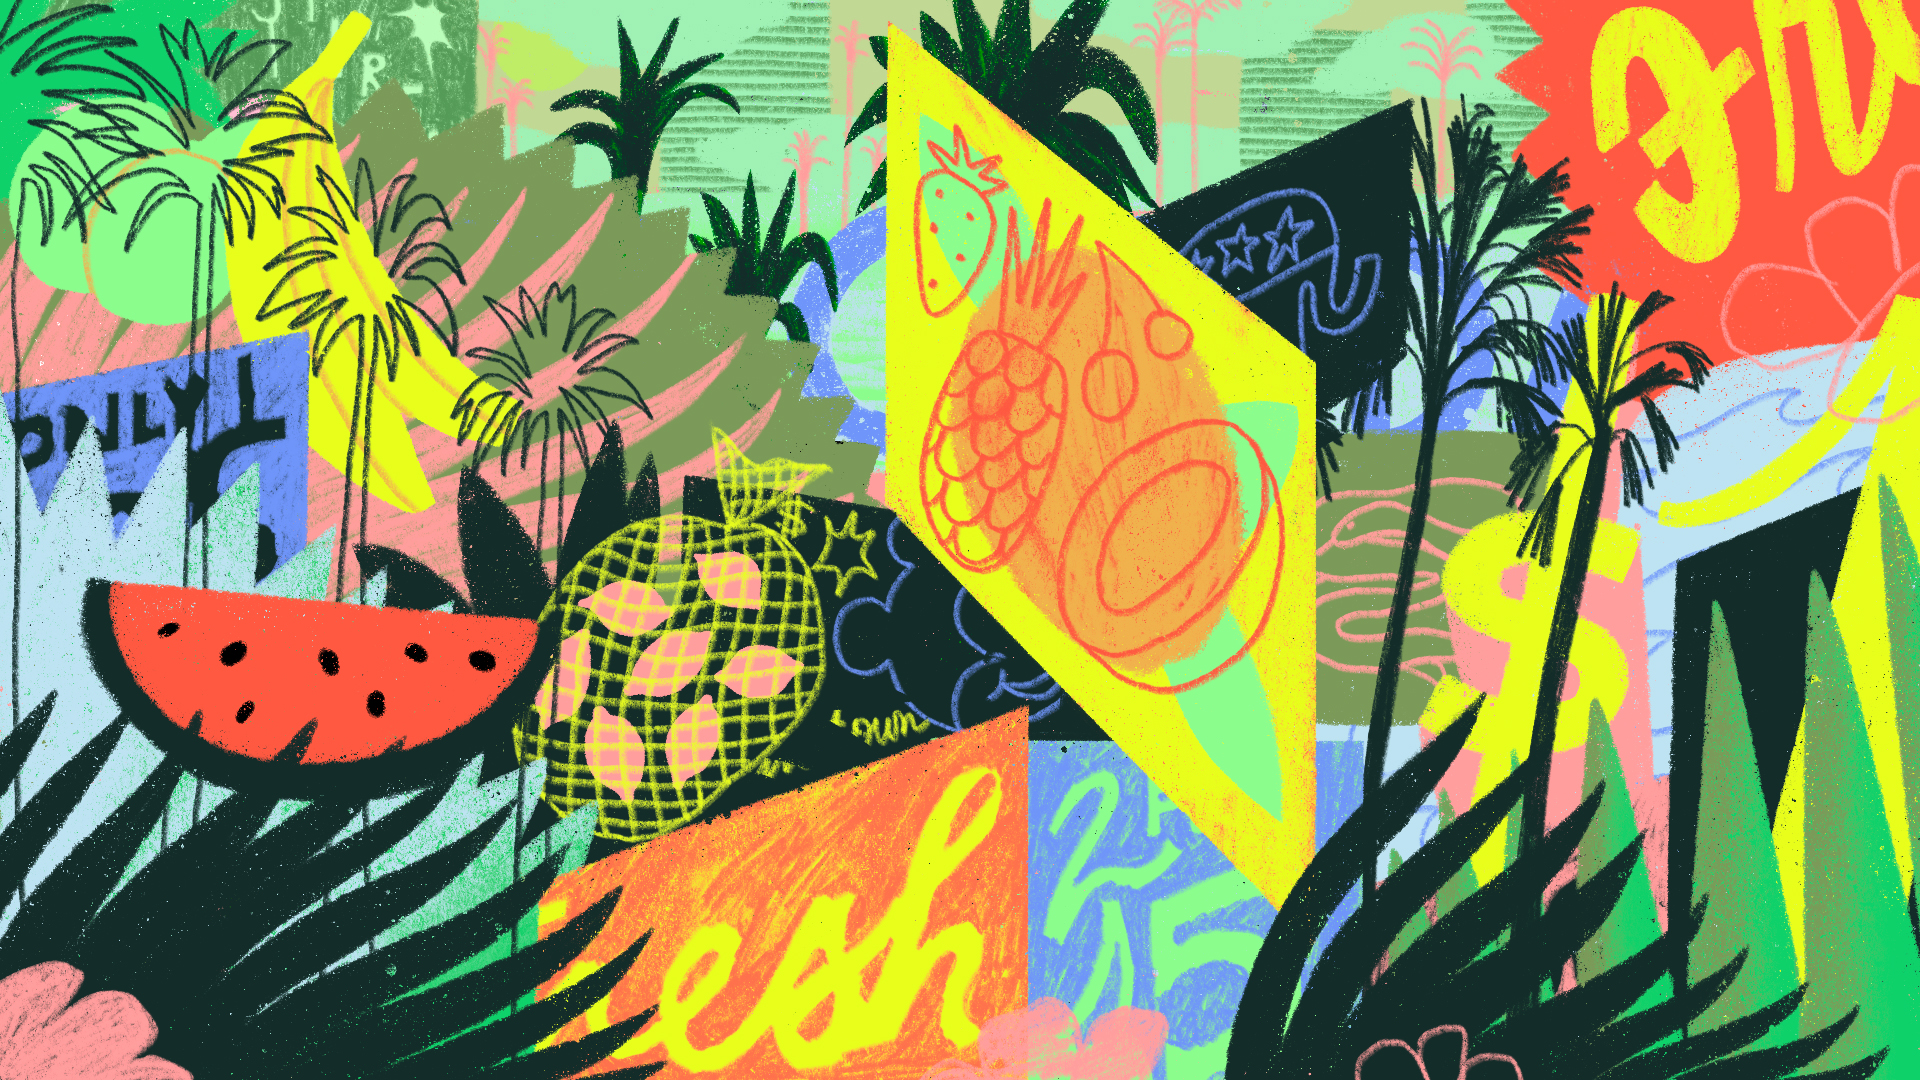 Colorful overlapping cartoon images of fruit and palm trees and dollar signs.